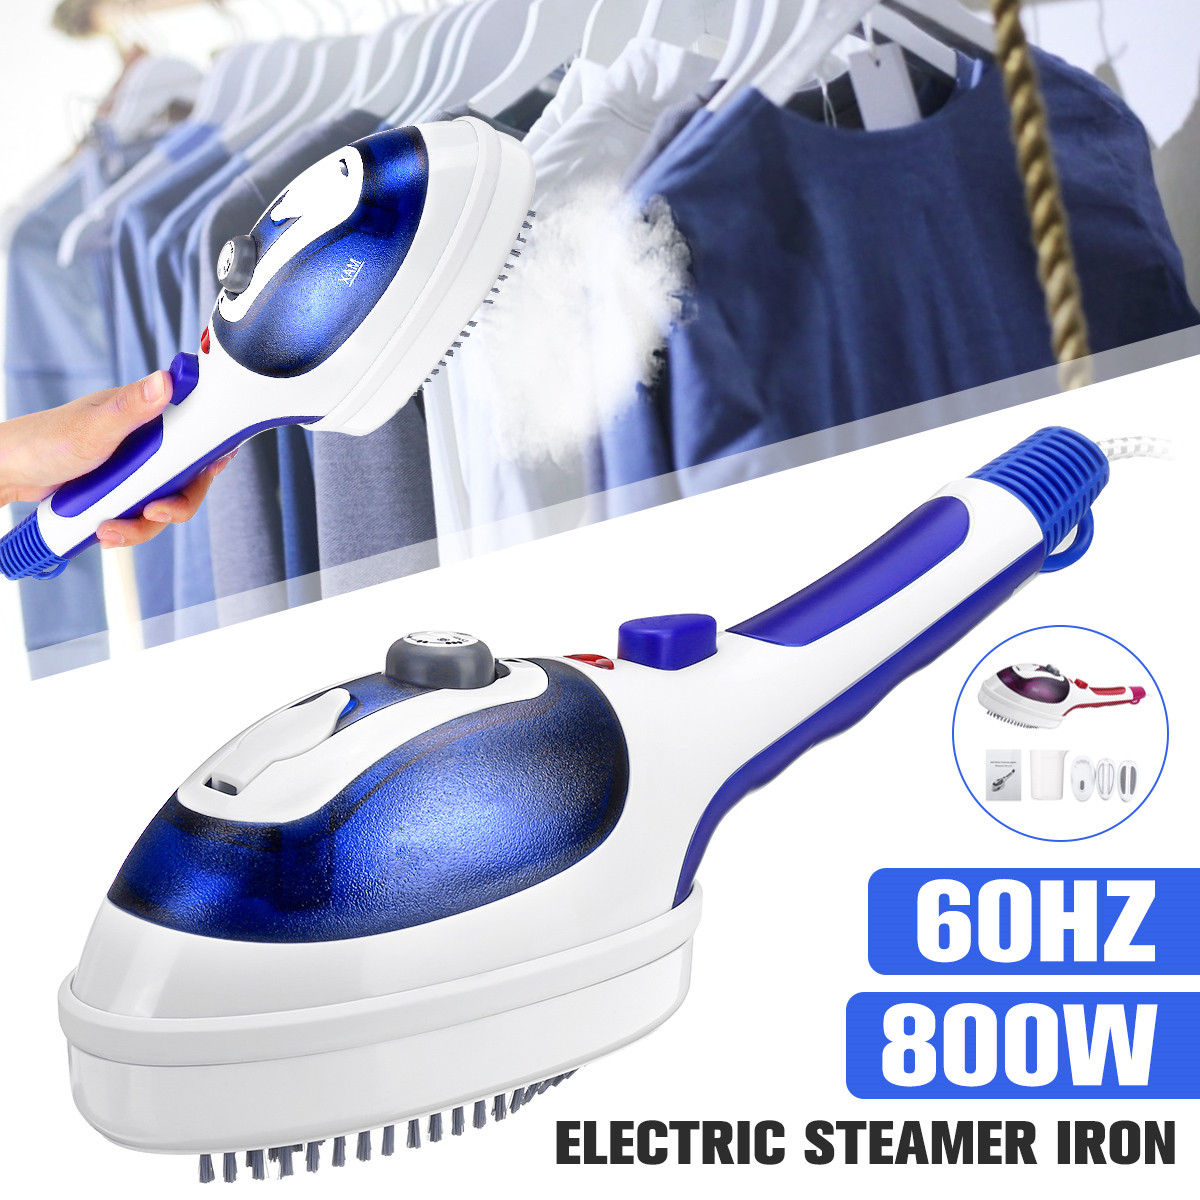 800W-Multifunctional-Iron-Clothes-Fabric-Garment-Steamer-Hand-Held-For-Home-Travel-1816485-2